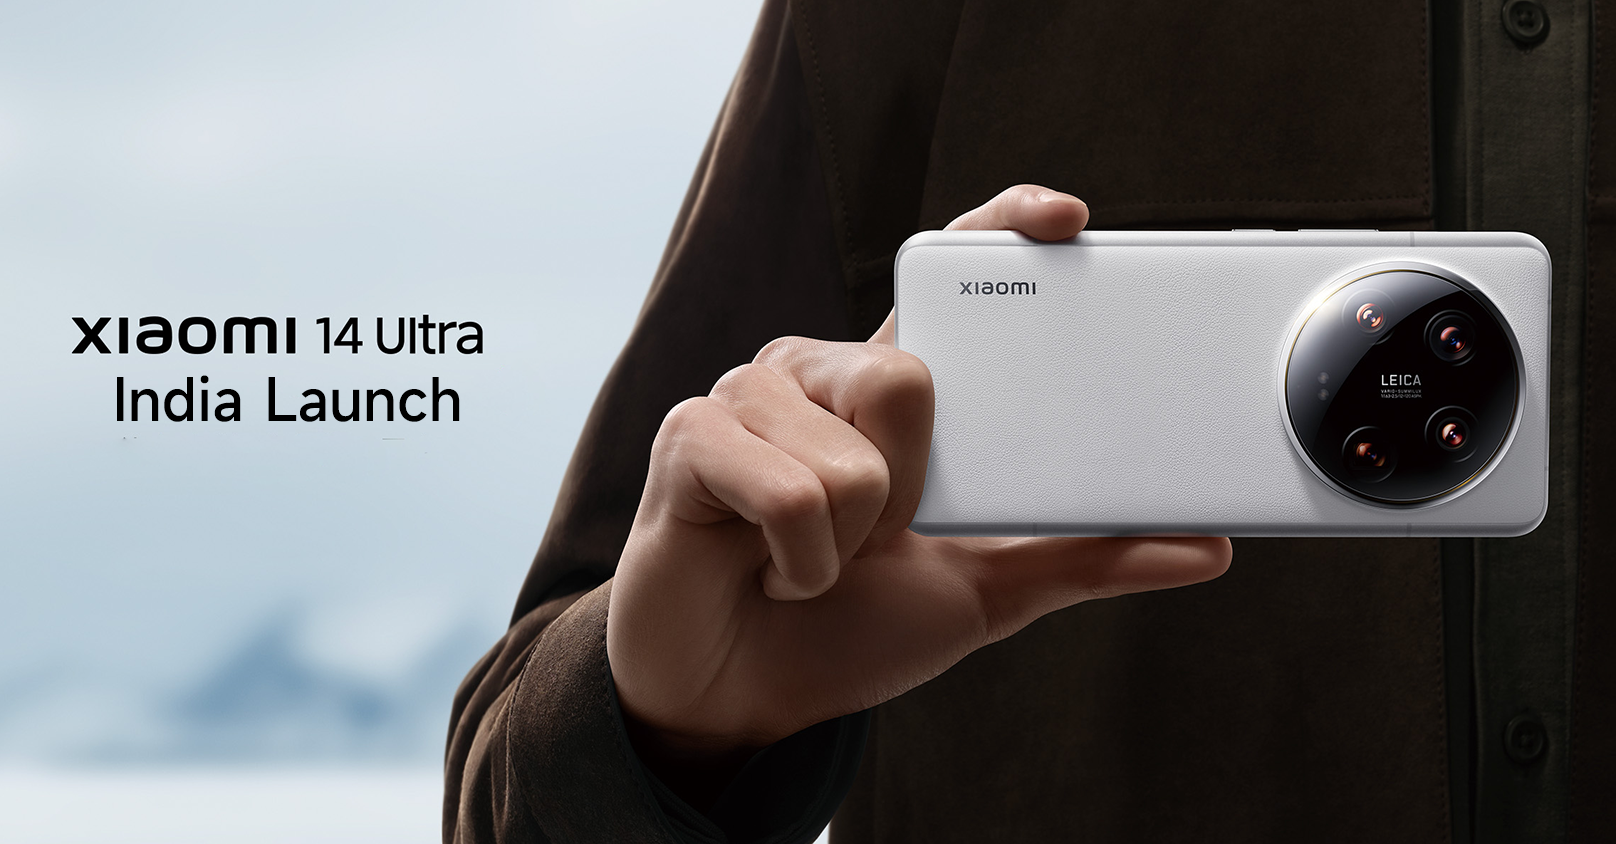 [Exclusive] Xiaomi 14 Ultra will be officially launched in India